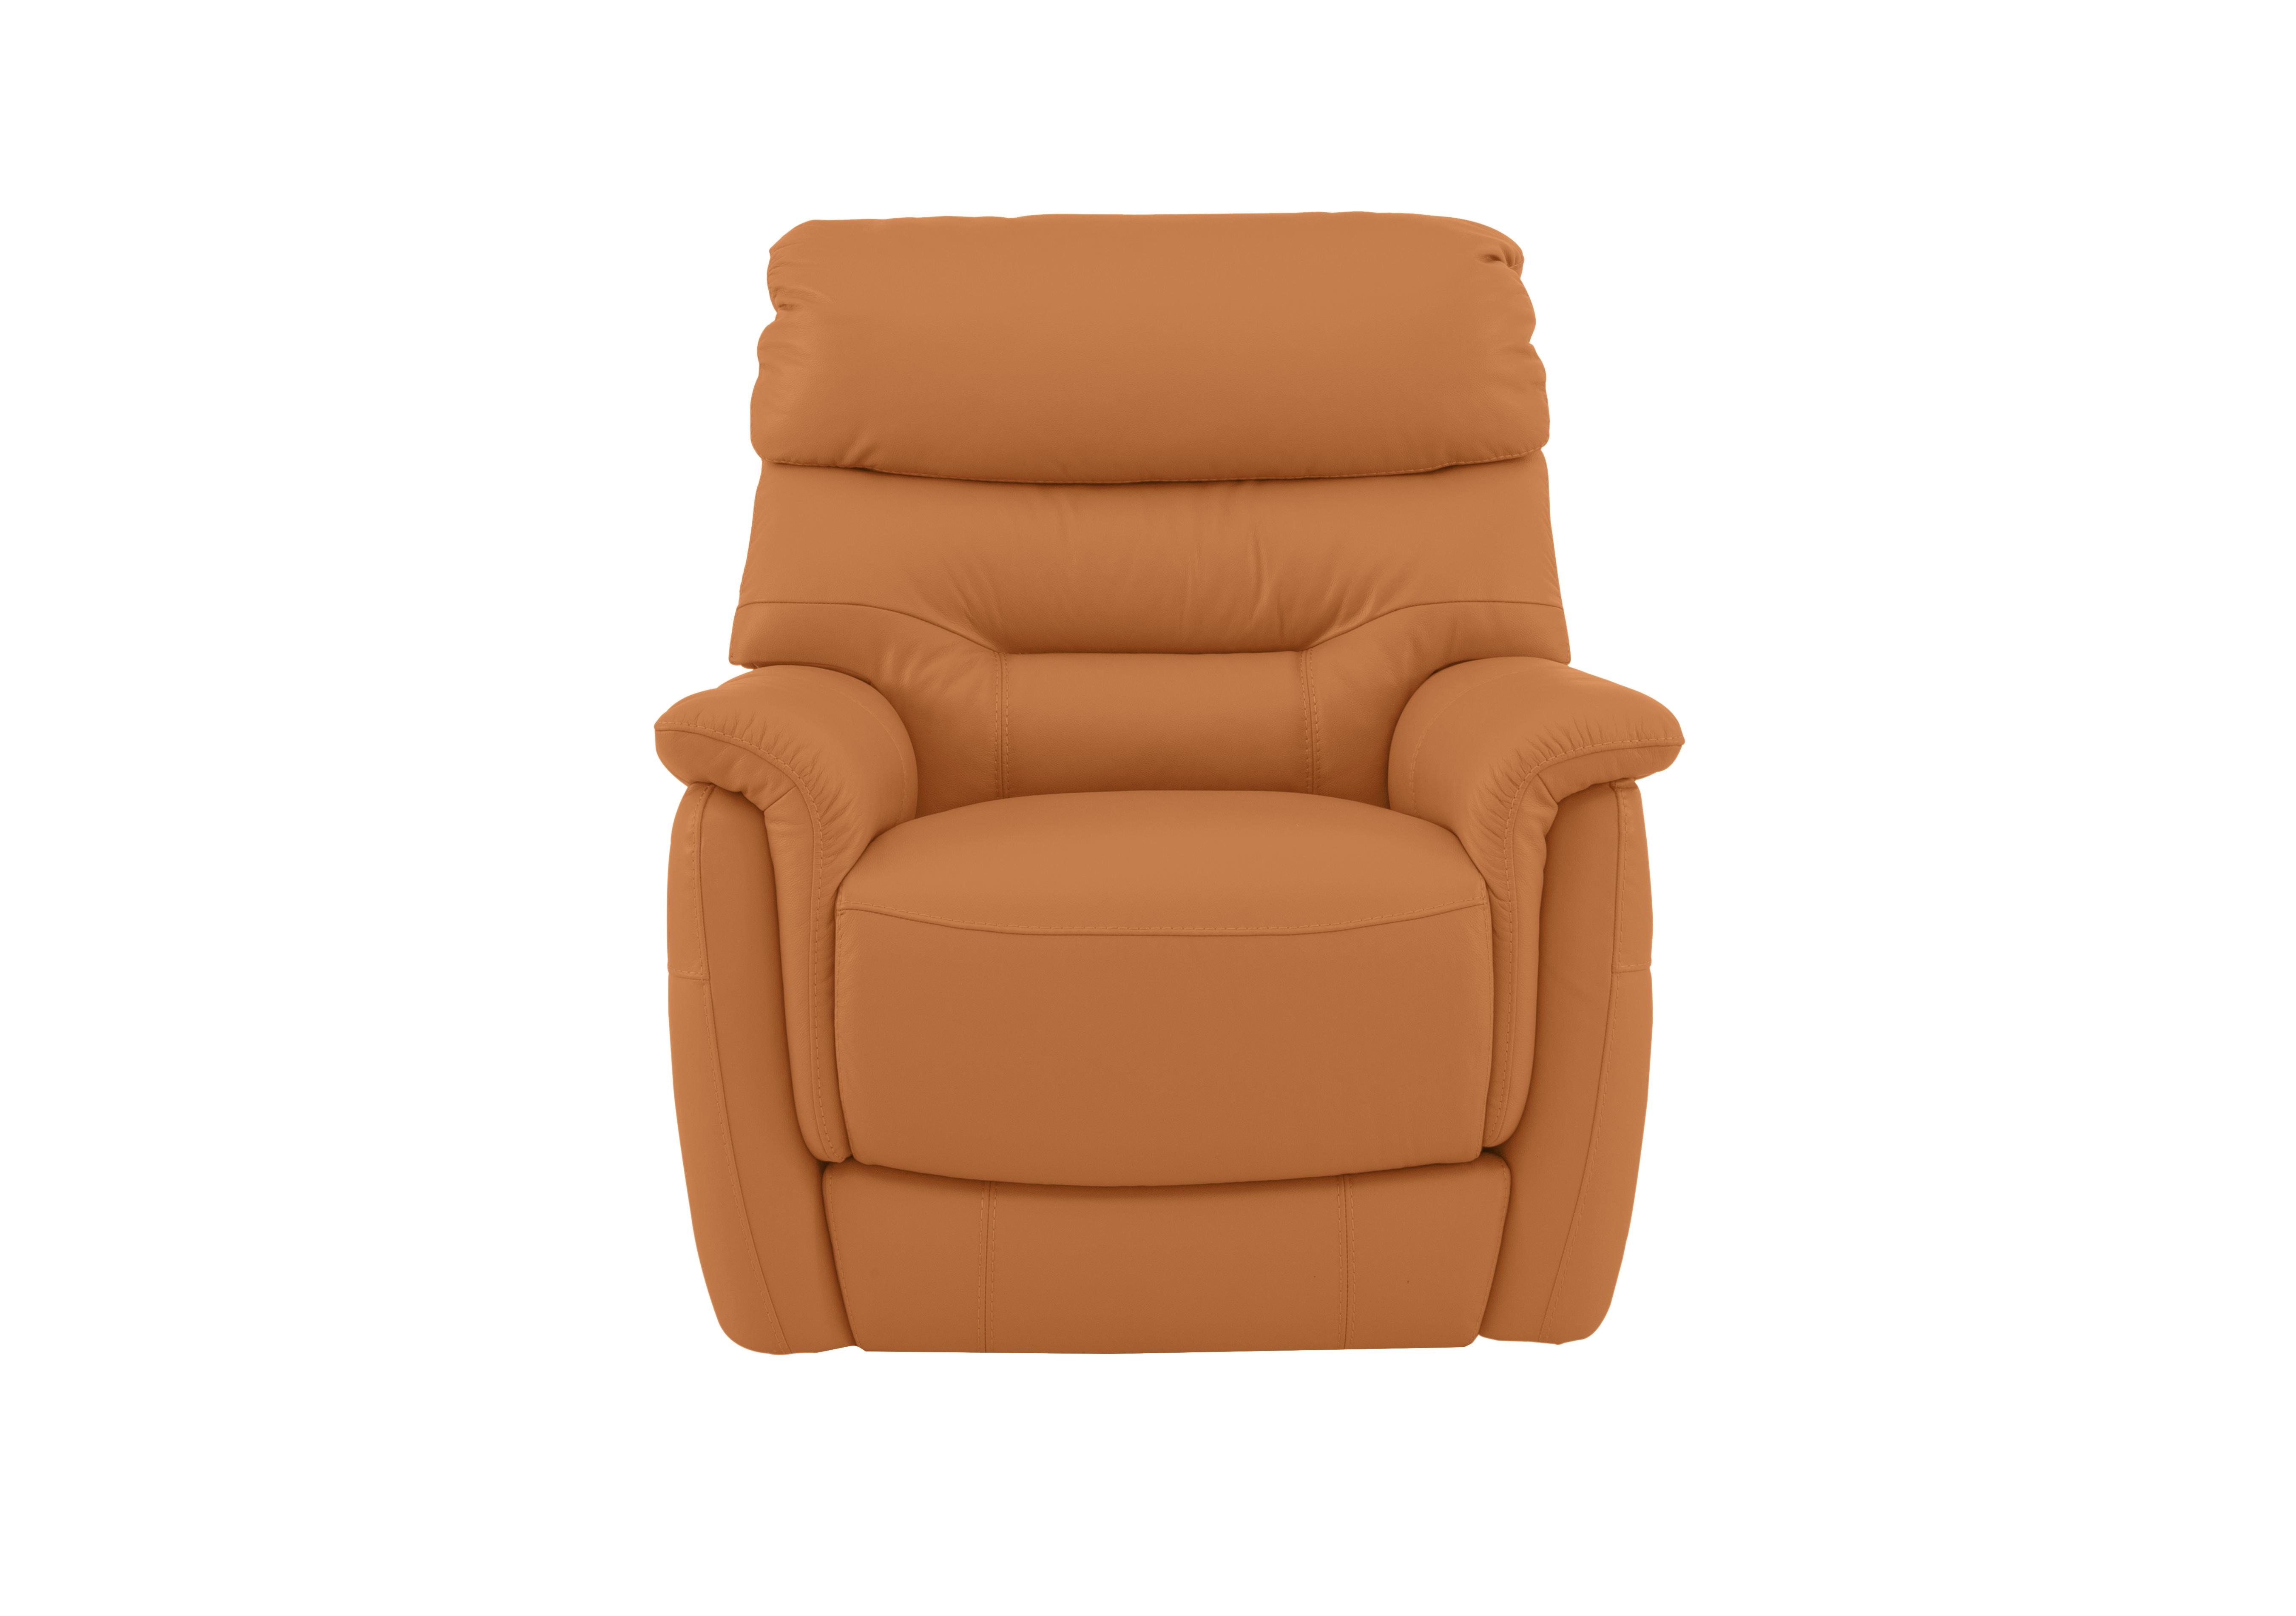 Chicago Leather Armchair in Bv-335e Honey Yellow on Furniture Village